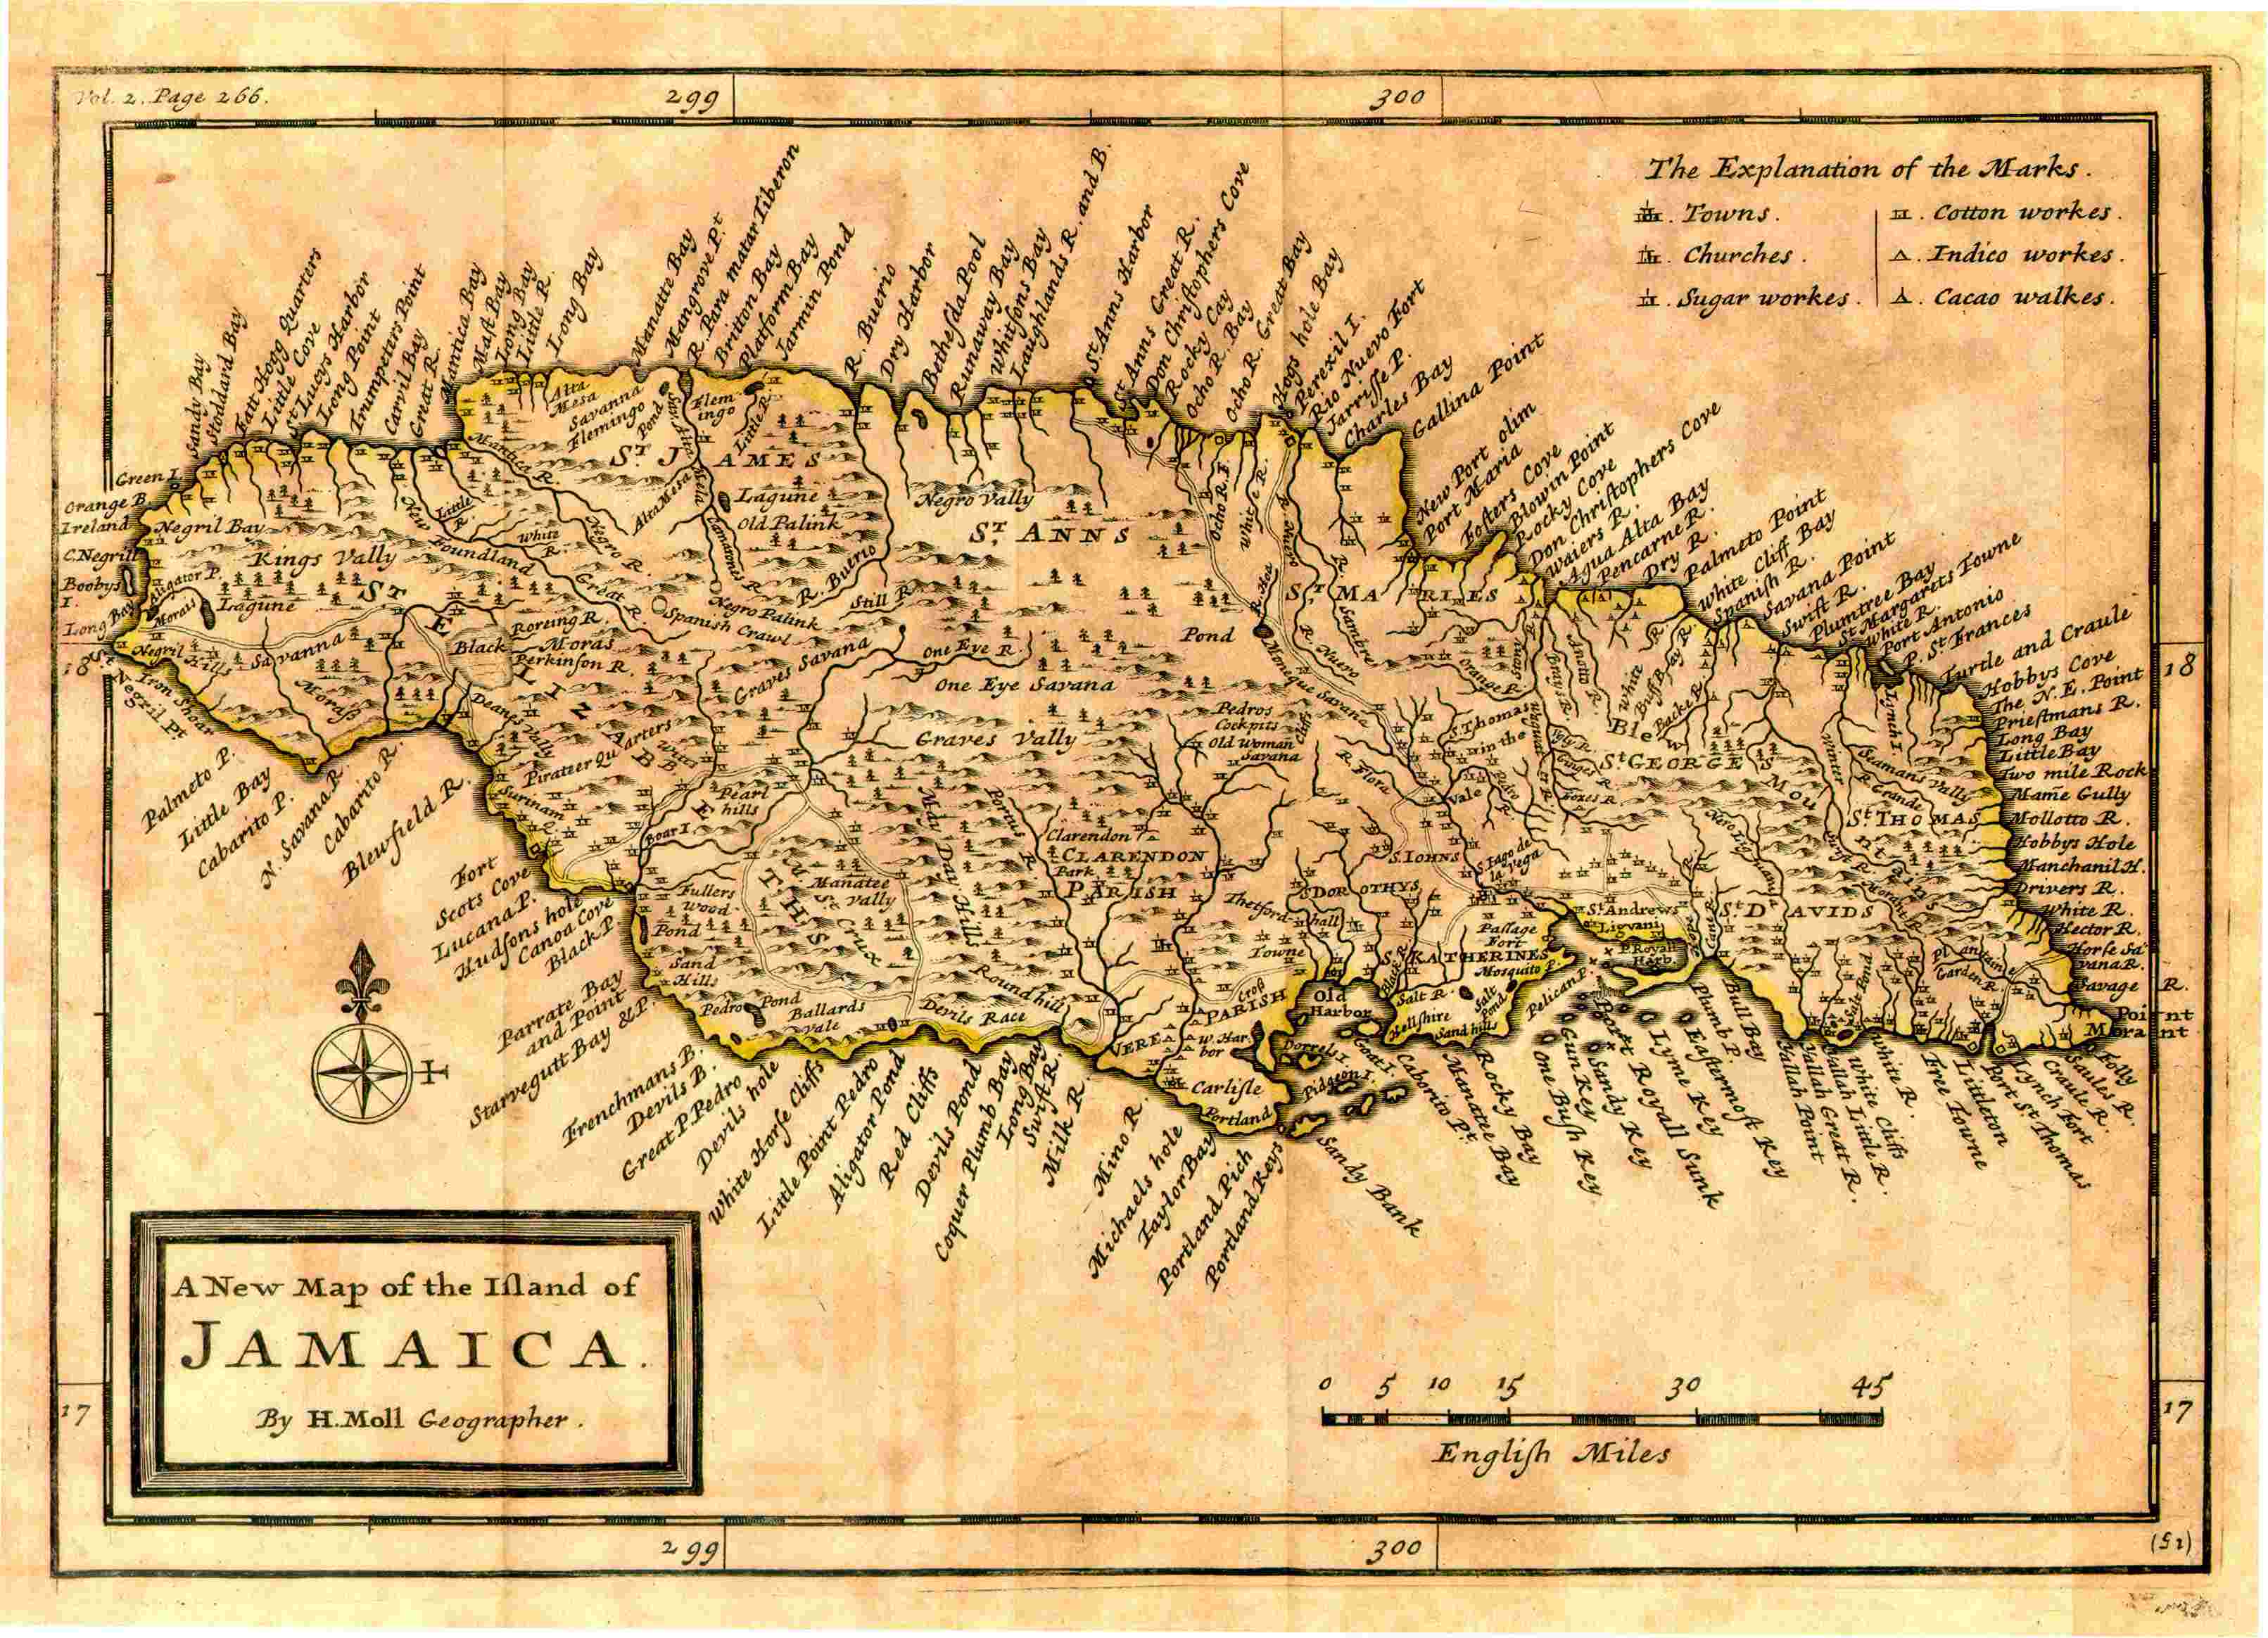 Herman_Moll._A_New_Map_of_the_Island_of_Jamaica._1717.jpg